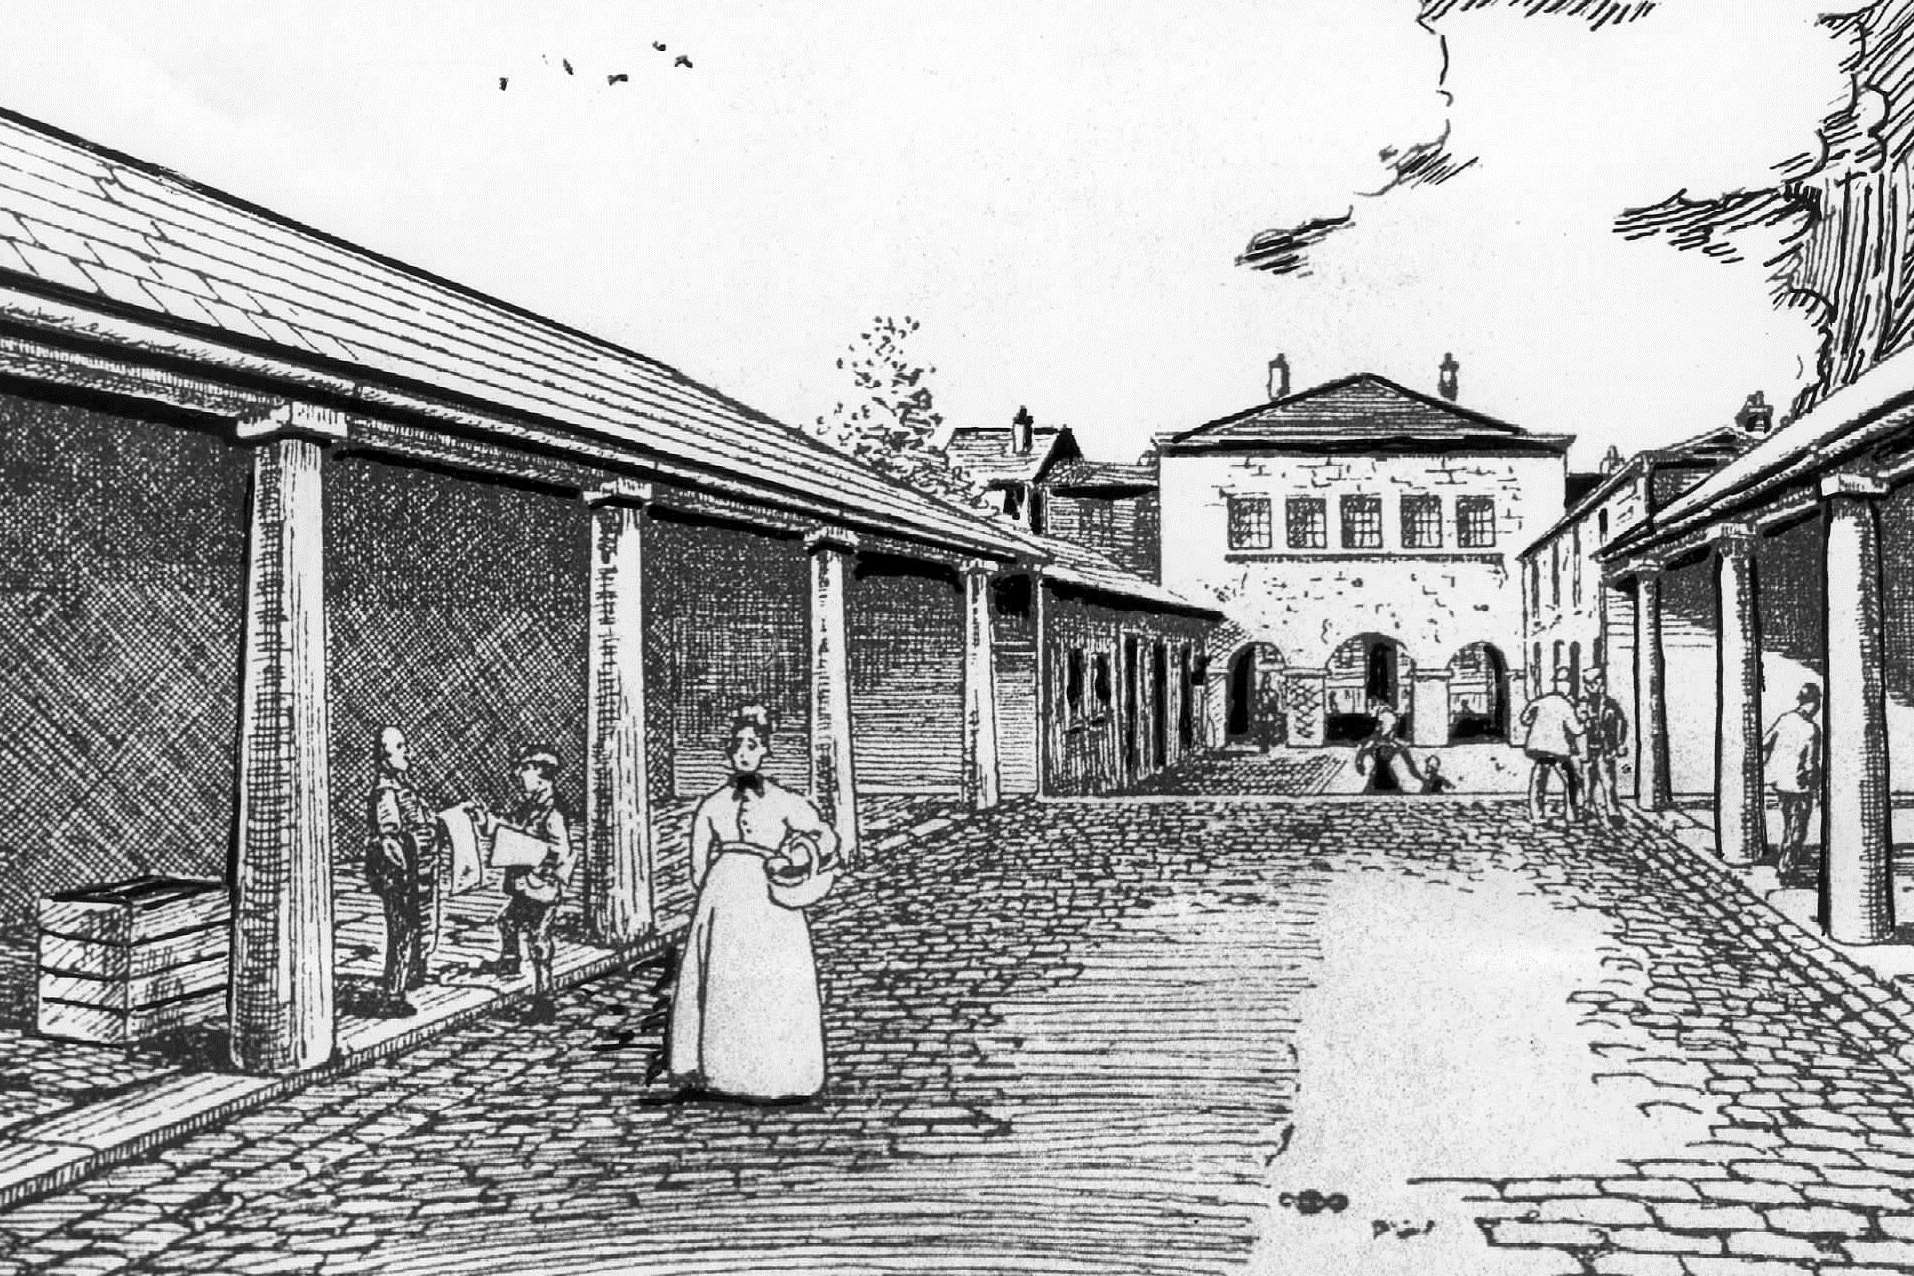 The first Gravesend market build in 1898.